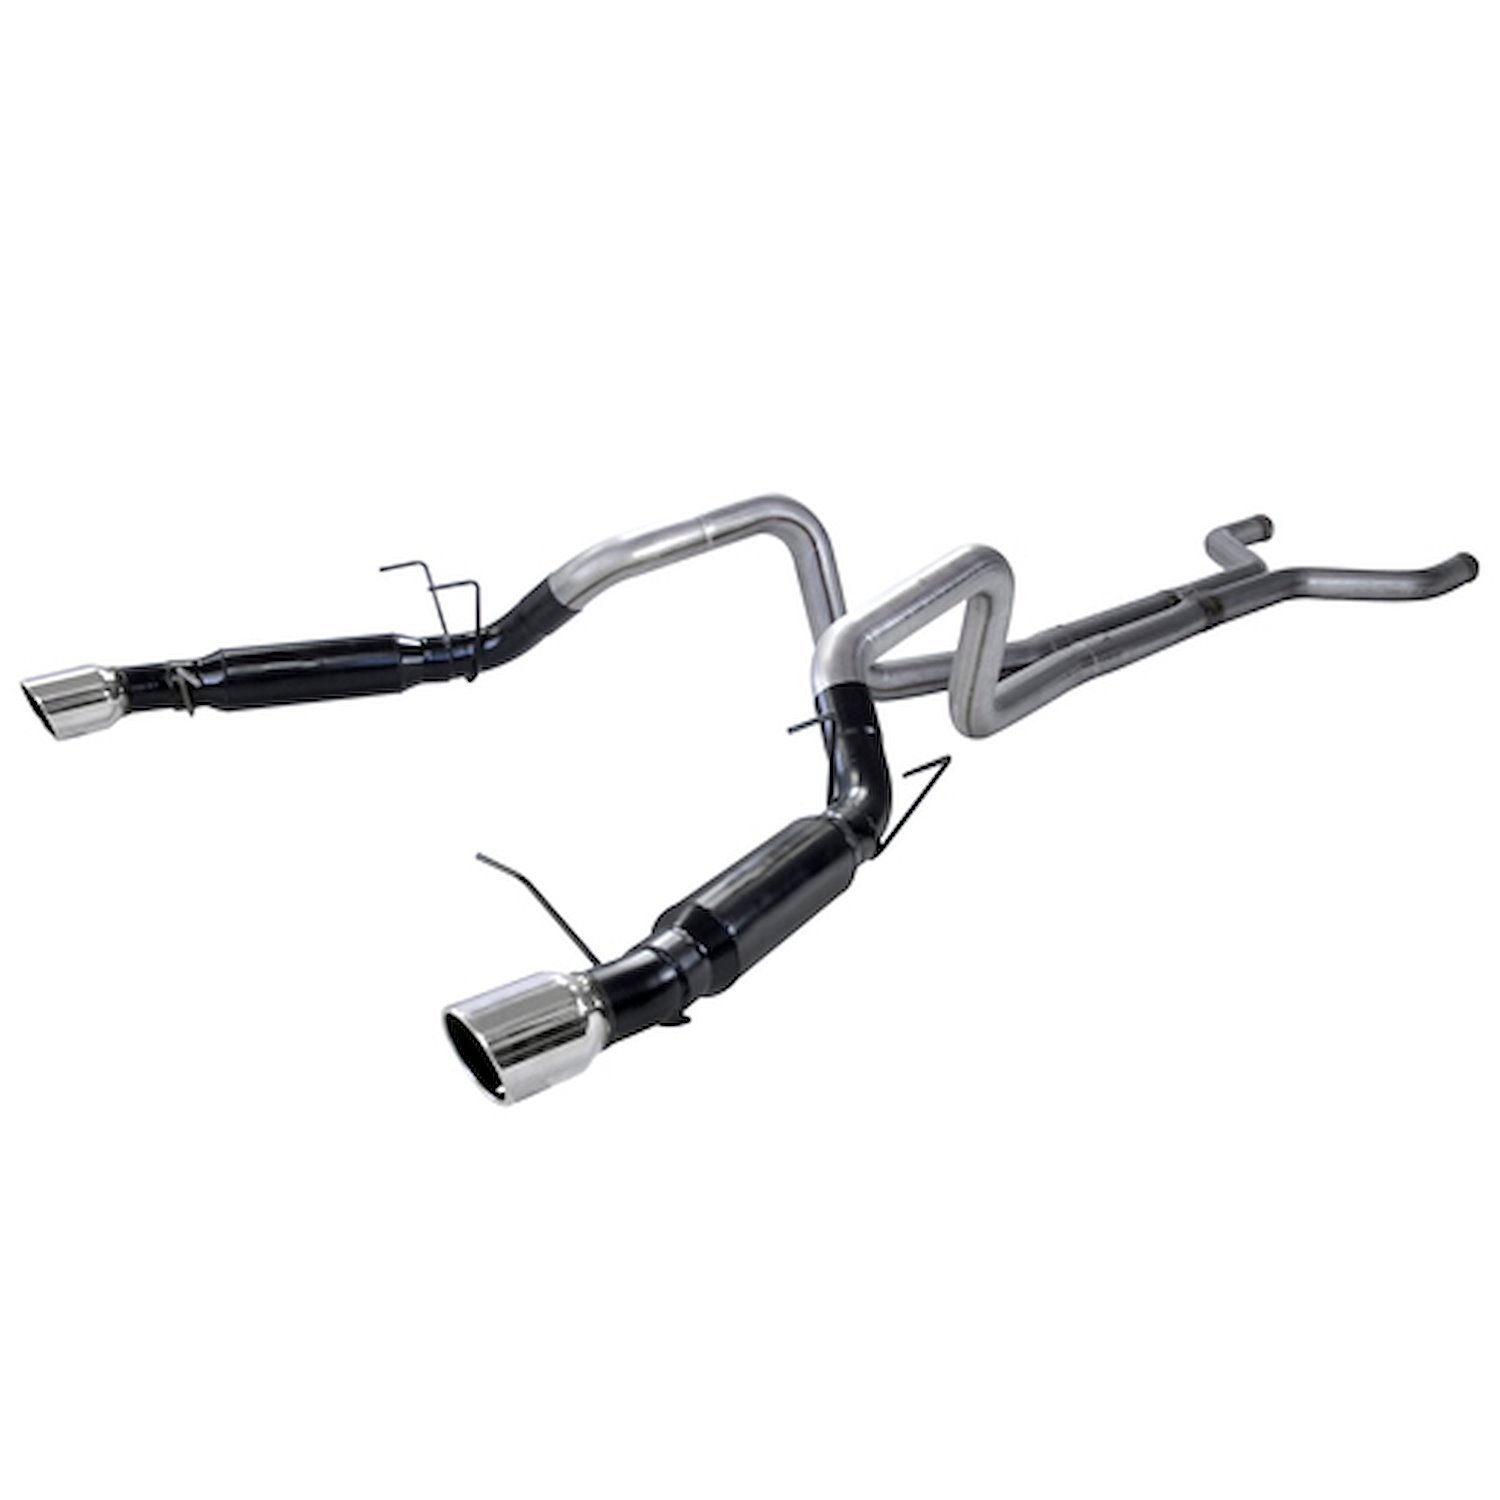 Outlaw Series Cat-Back Exhaust System 2011-2012 Ford Mustang